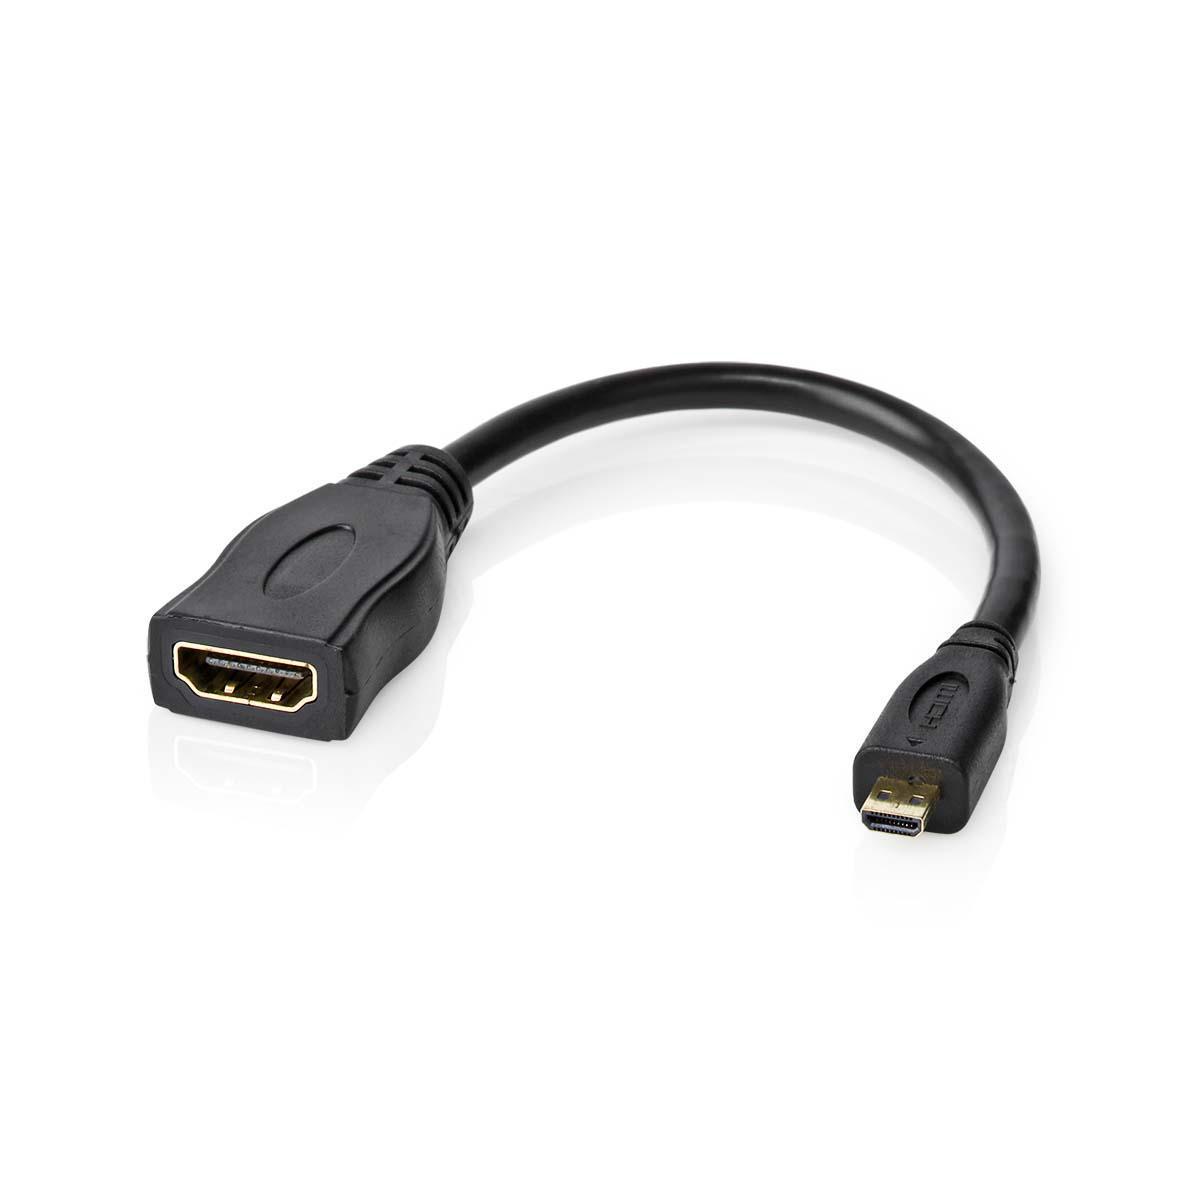 Cable adaptateur micro hdmi male (type d) vers hdmi femelle l=0.20m / 4k@30hz / 10.2gbps